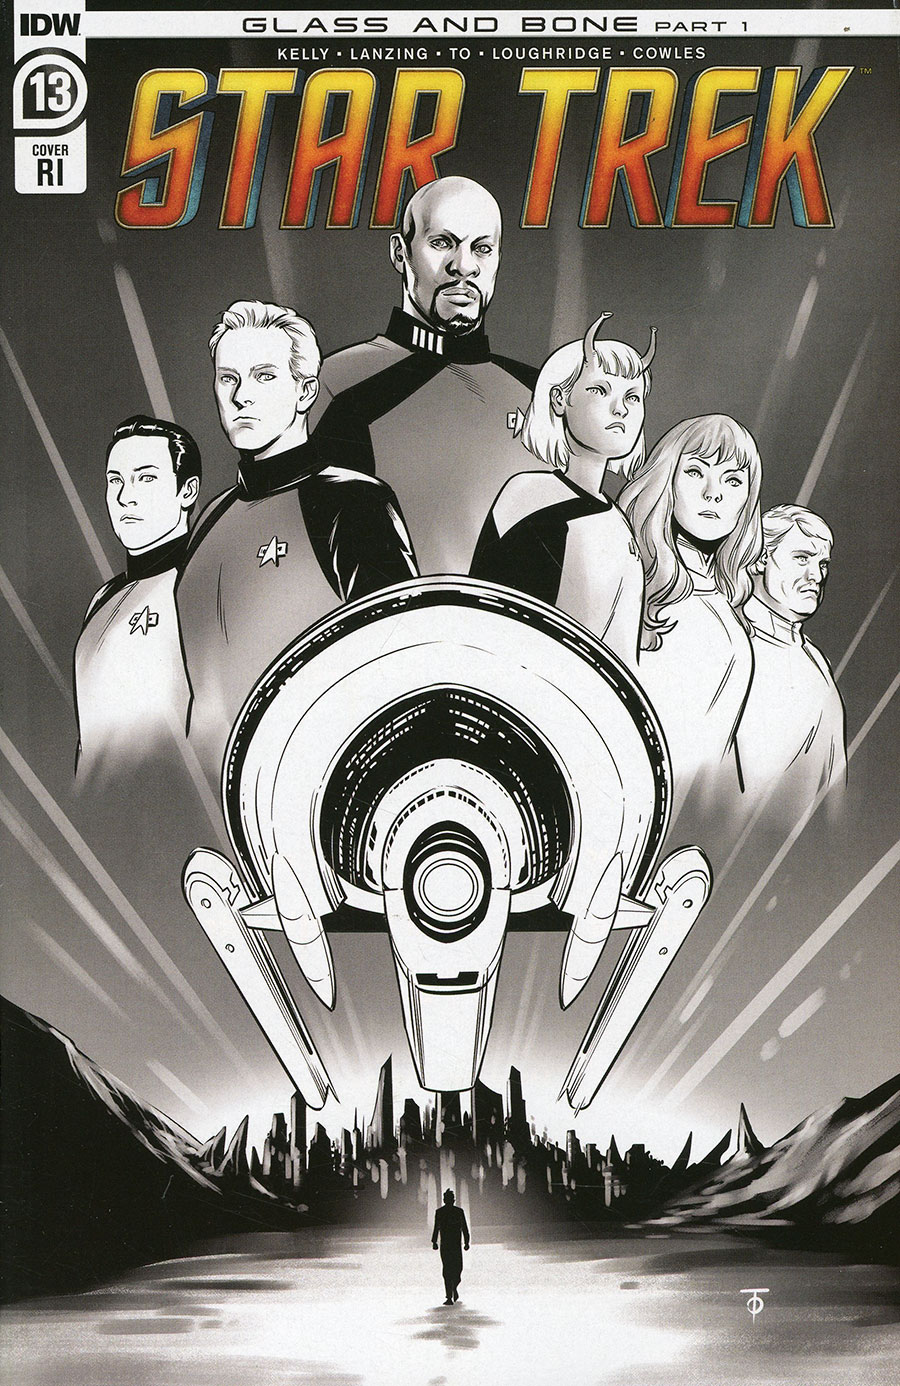 Star Trek (IDW) Vol 2 #13 Cover D Incentive Marcus To Black & White Cover